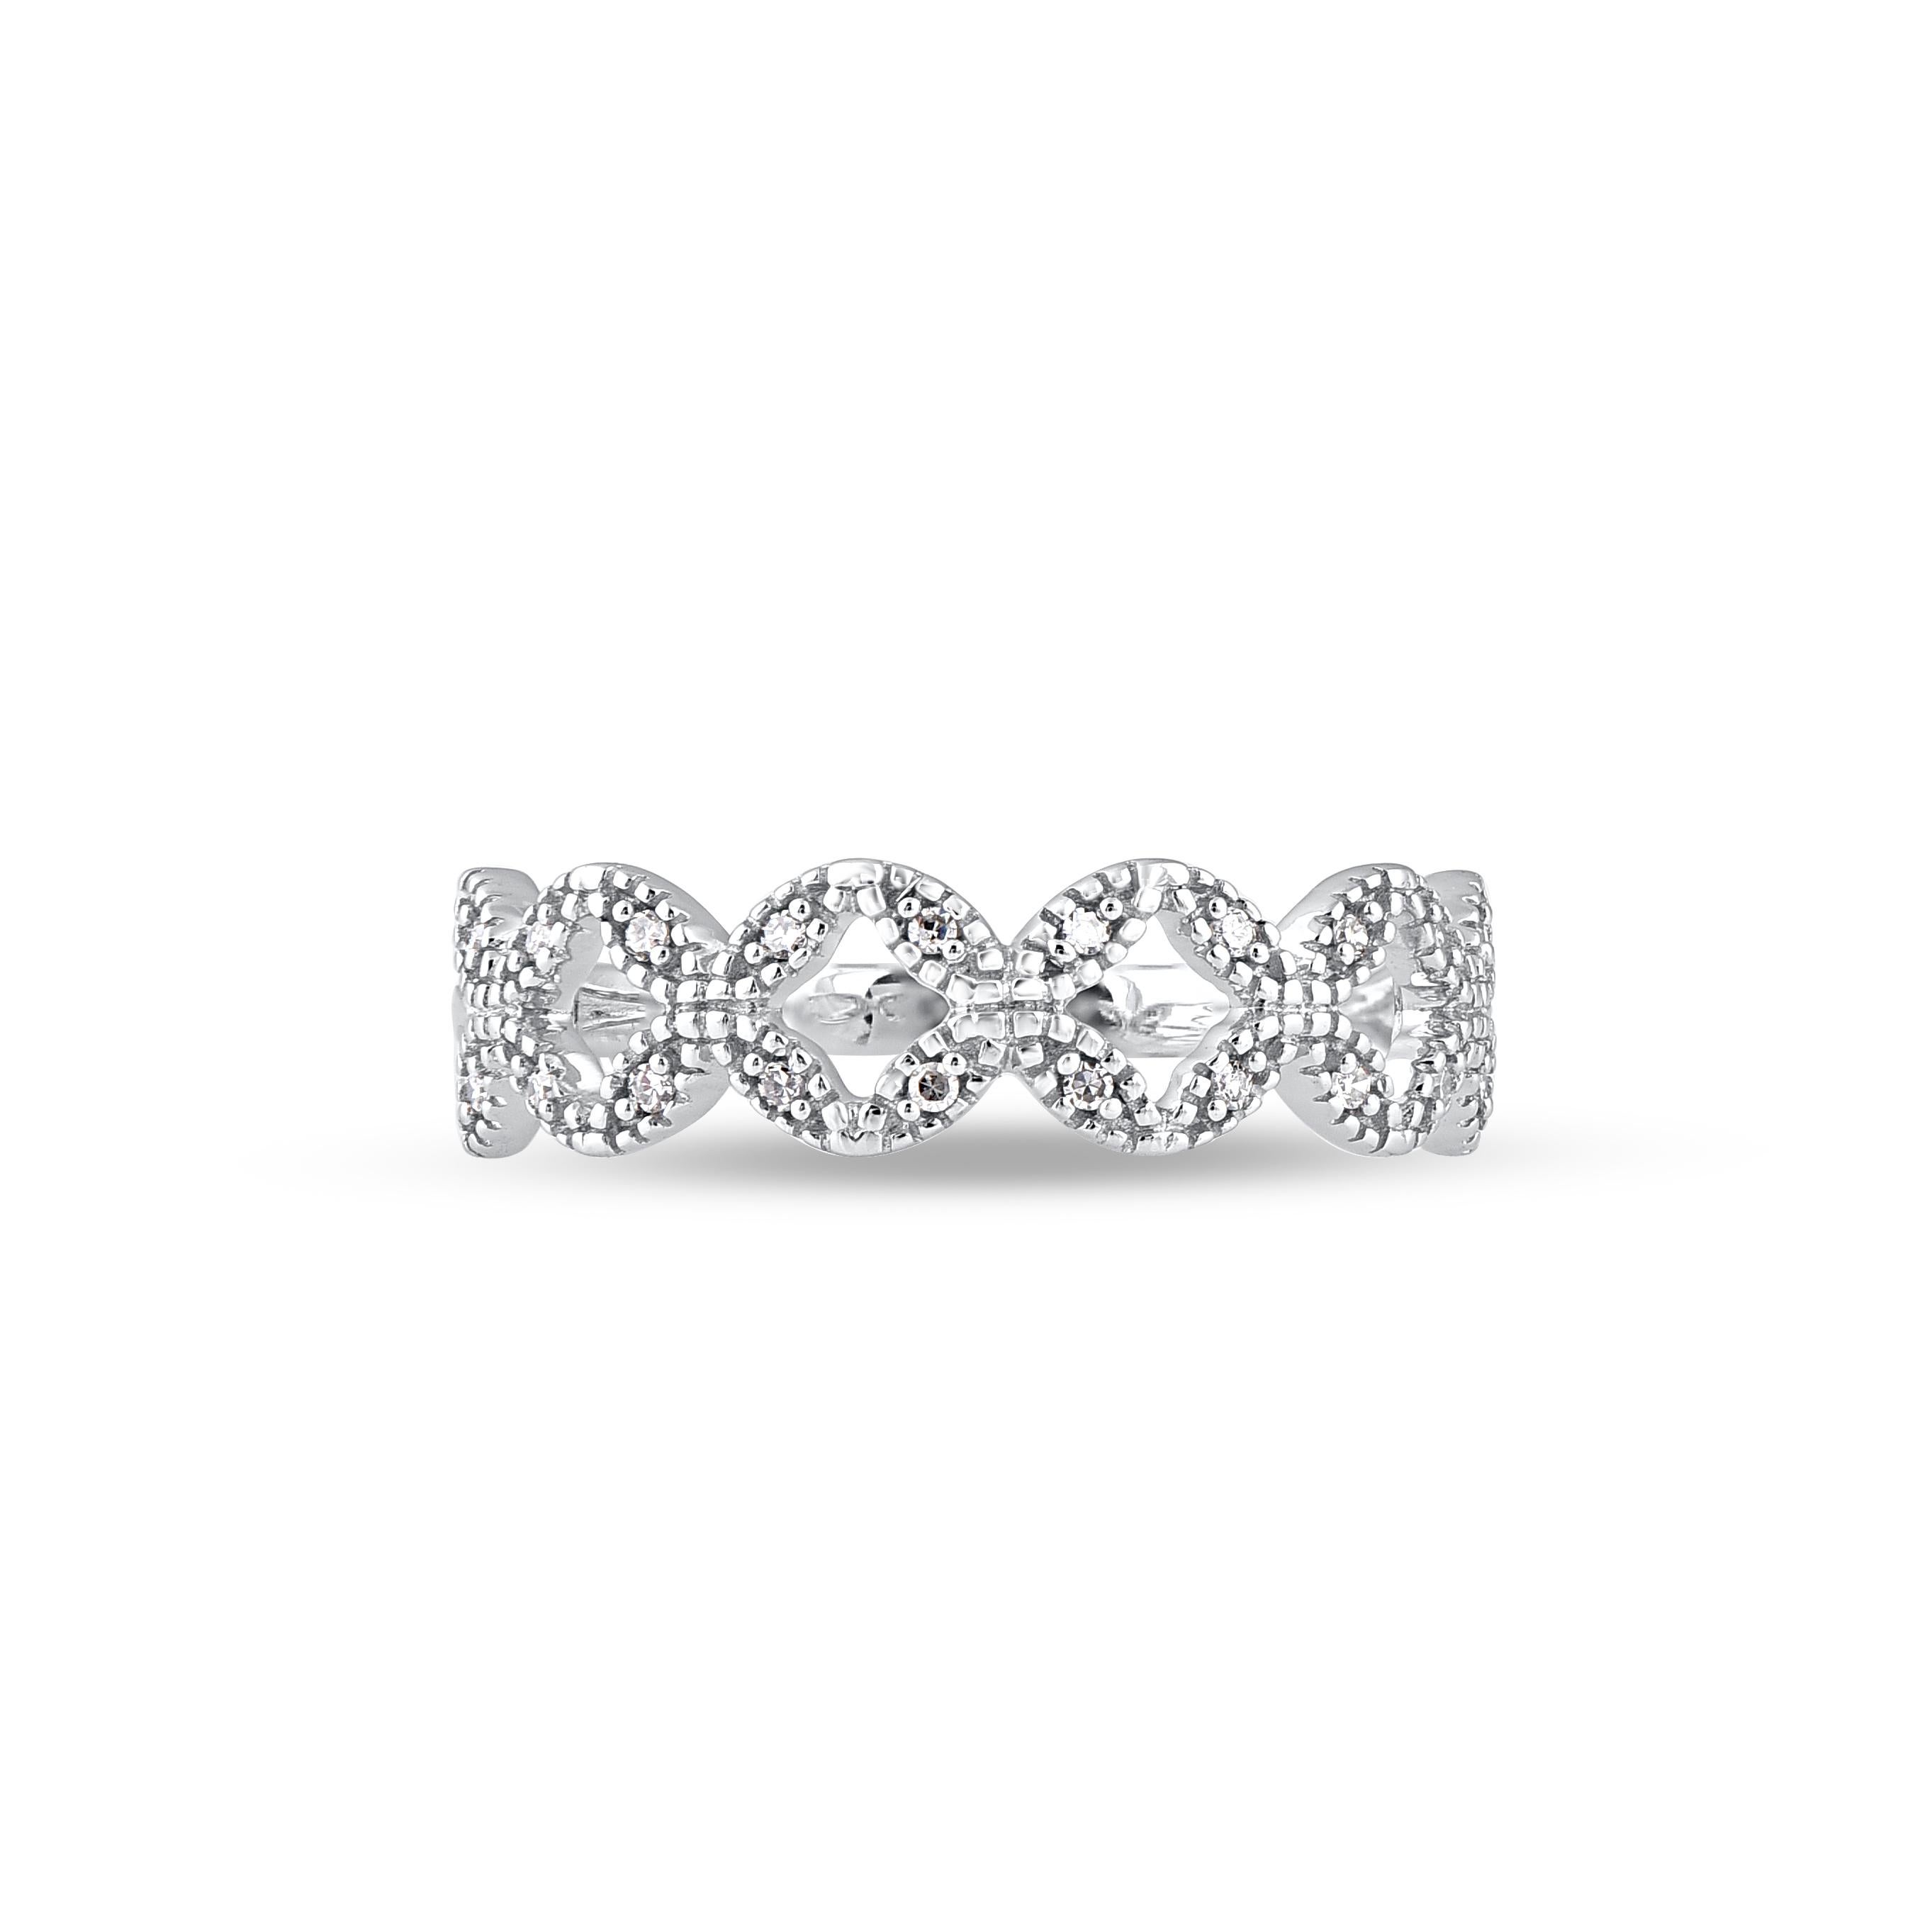 Express your love for her in the most classic way with this band ring. This beautiful ring features shimmering 20 single cut diamonds studded in pave setting. Crafted in 14 karat white gold. The total diamond weight is 0.06 carat. The diamonds are